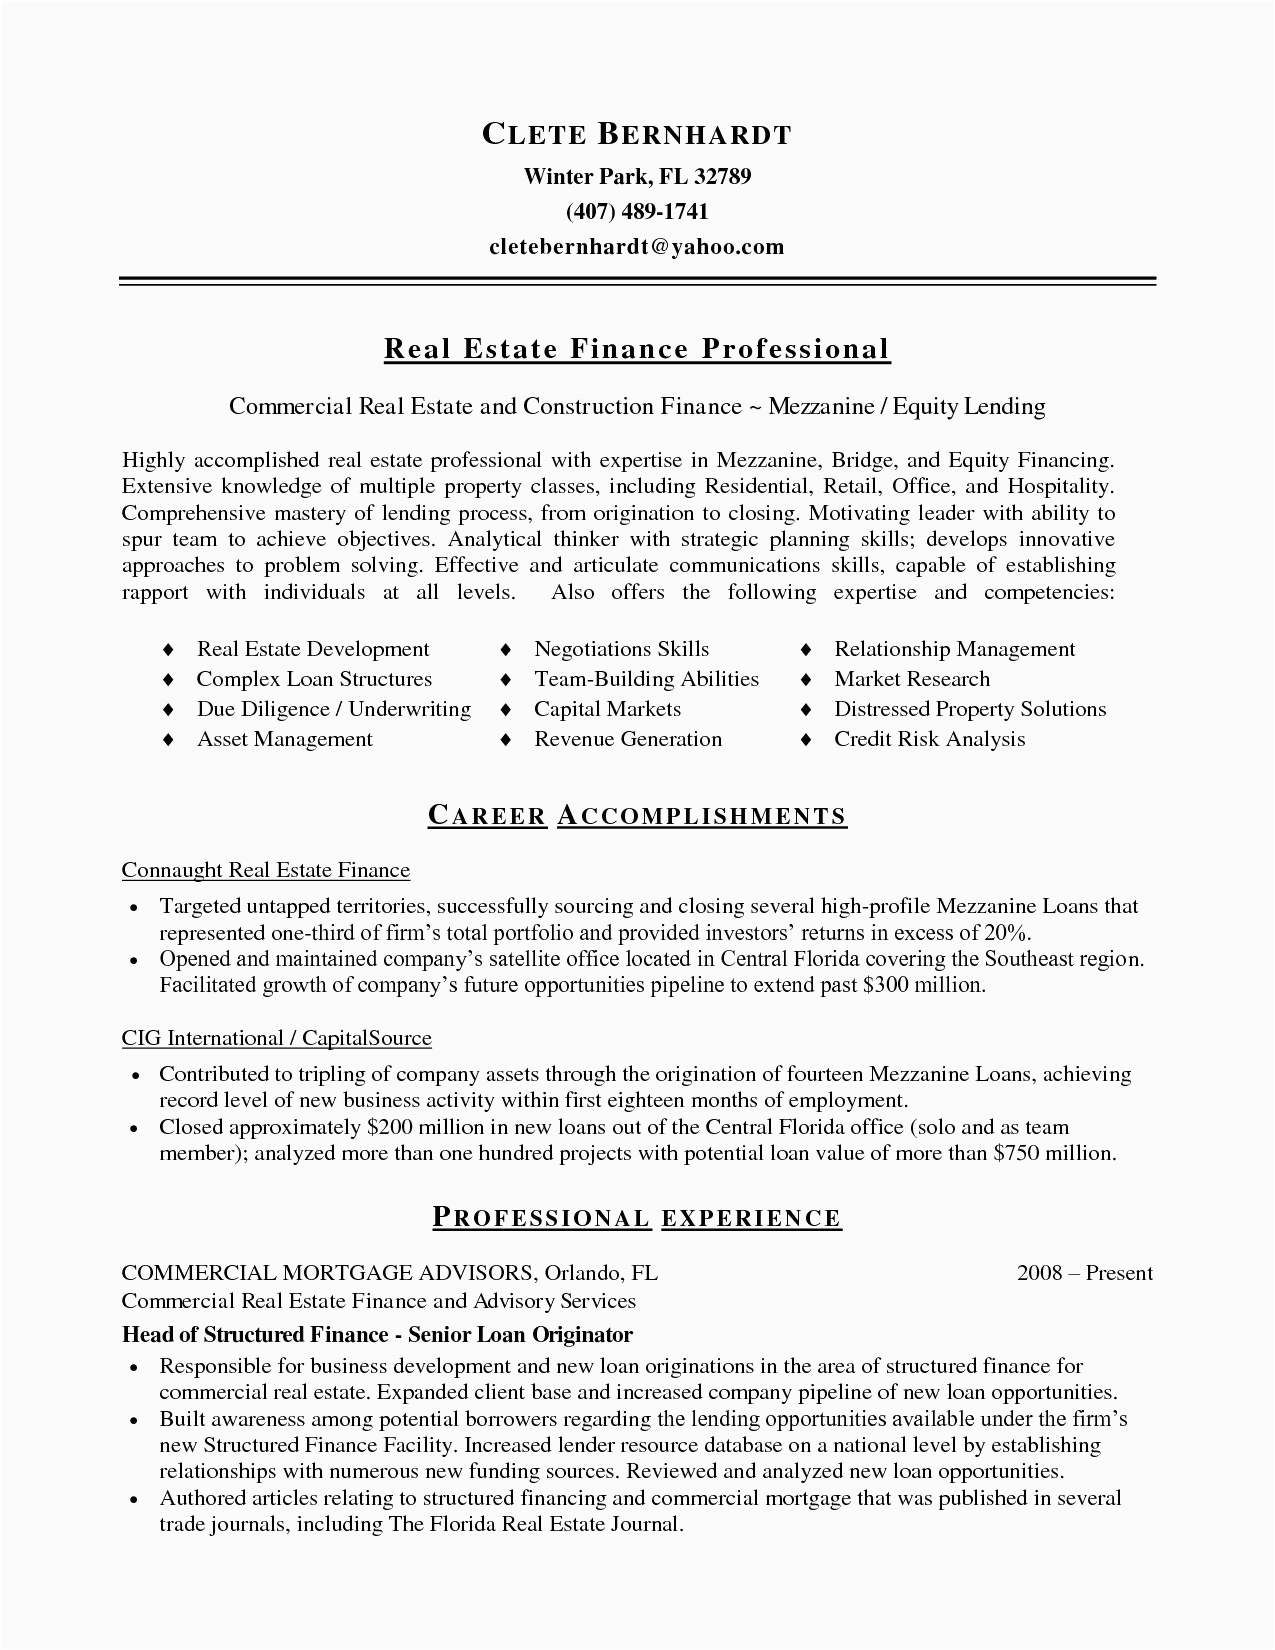 Resume Sample for Real Estate Agent with Experience 11 12 Sample Real Estate Resume No Experience